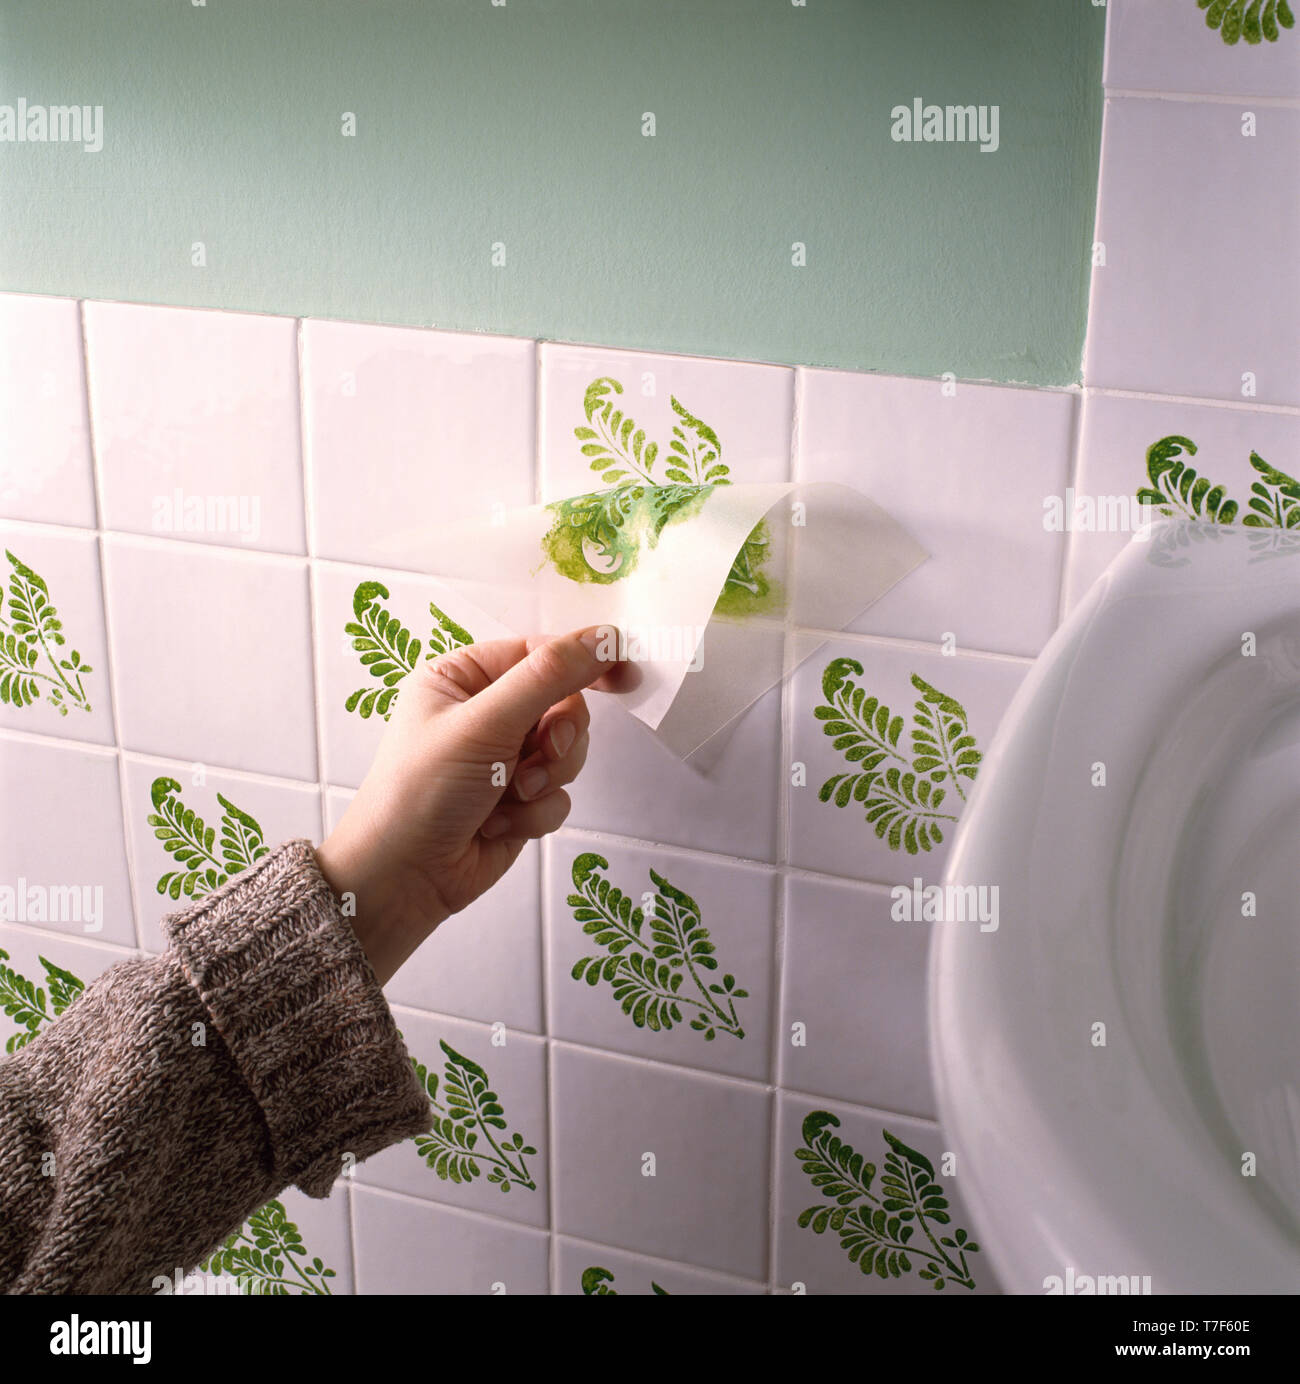 Hand removing backing from stencil on white tiling Stock Photo